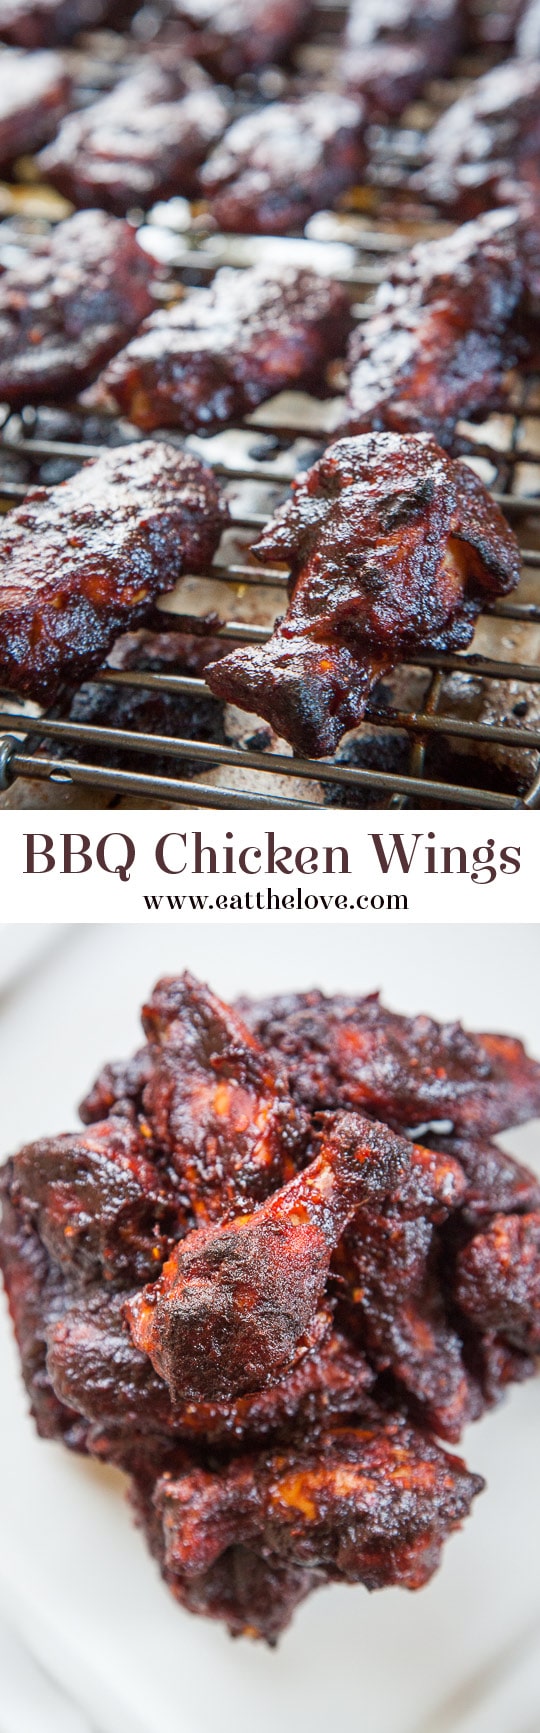 BBQ Chicken Wings Recipe with spicy, sweet and tangy homemade barbecue sauce! Photo and recipe by Irvin Lin of Eat the Love.